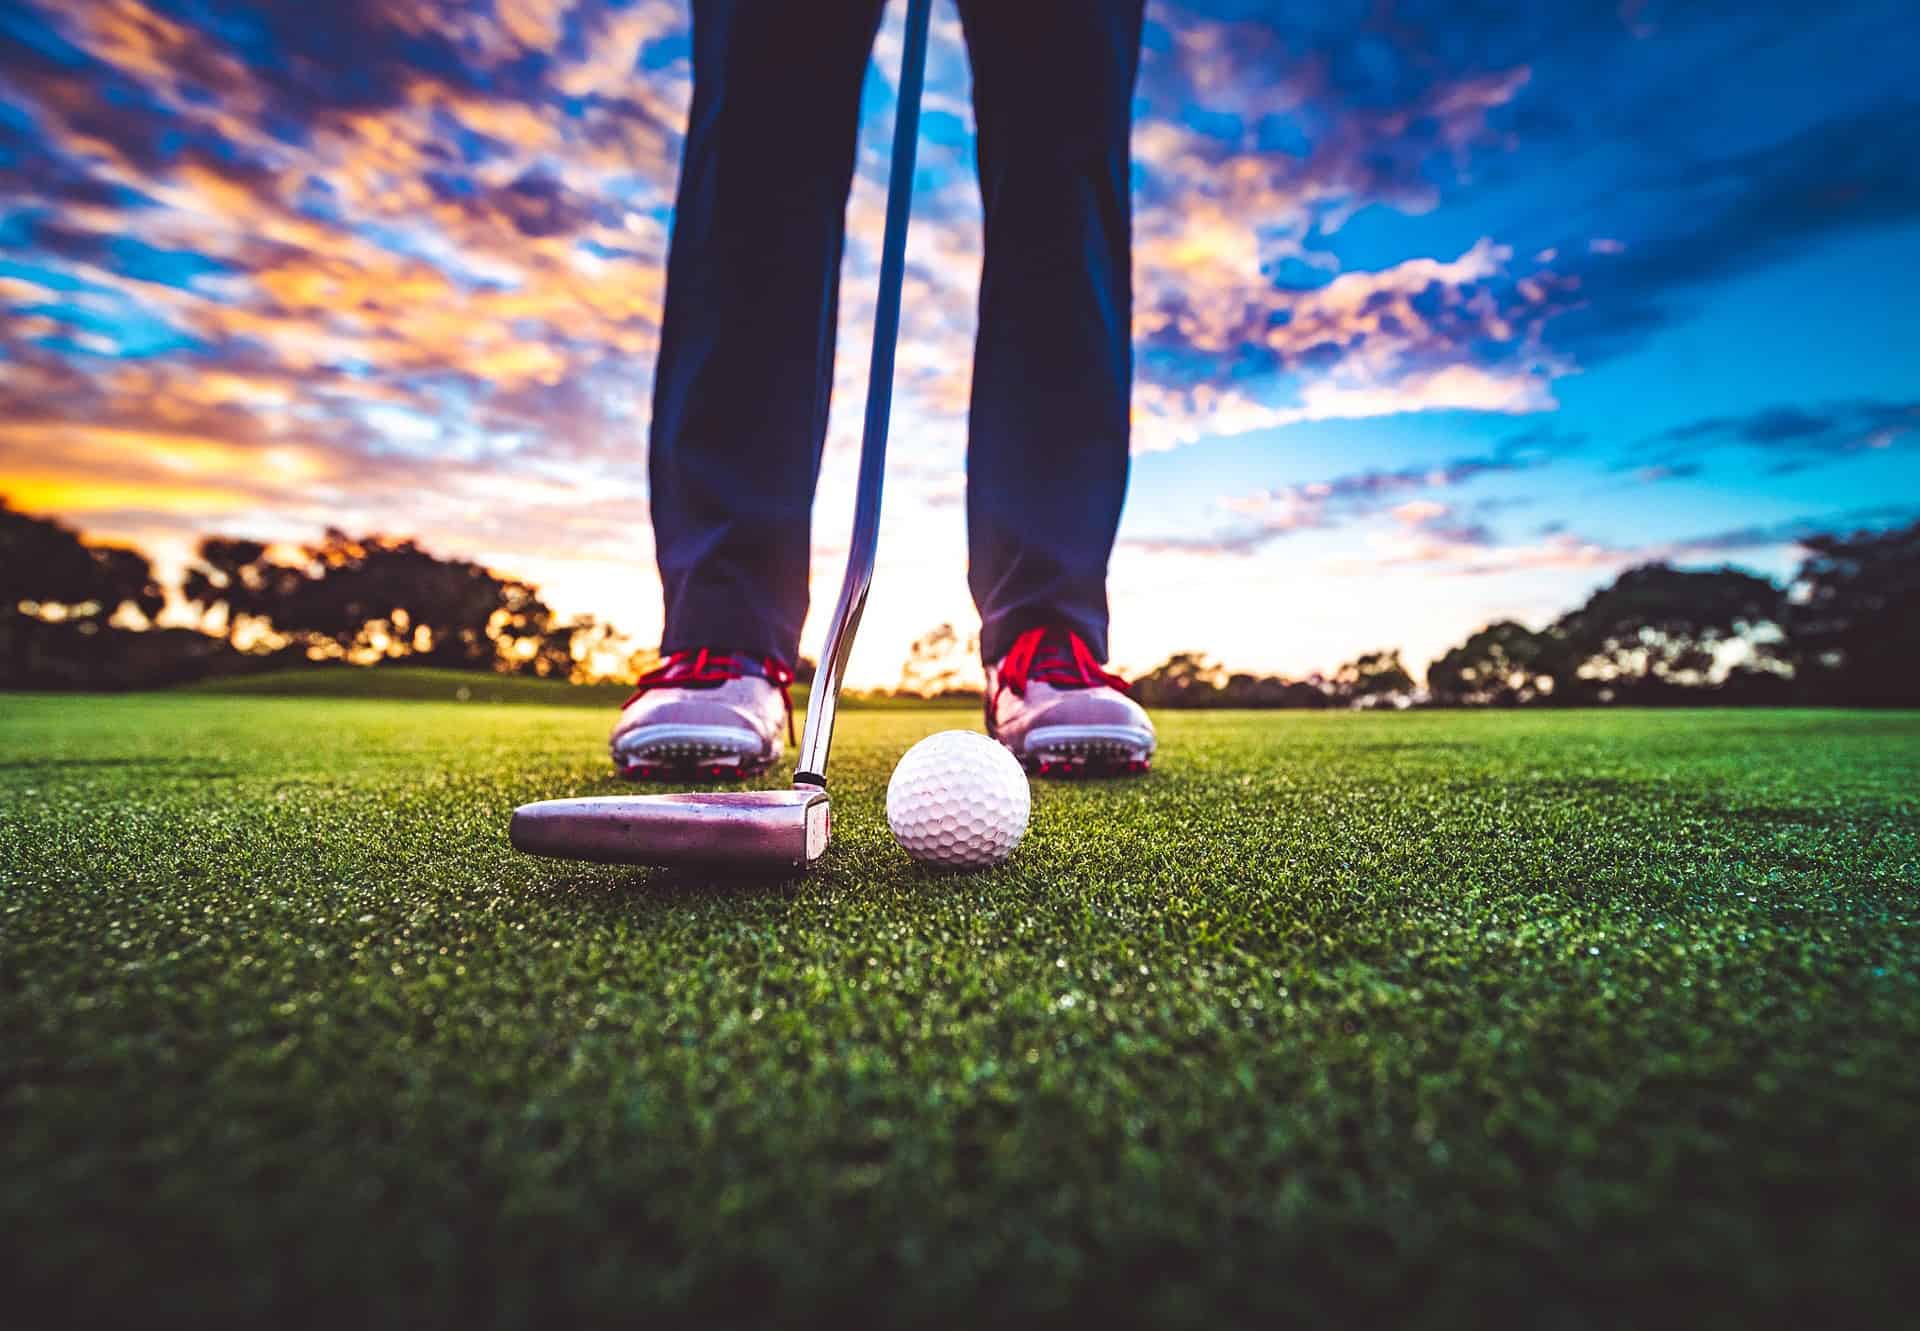 Golf ball on the green with stunning sunset sky and anonymous golfer wearing golf shoes and holding club